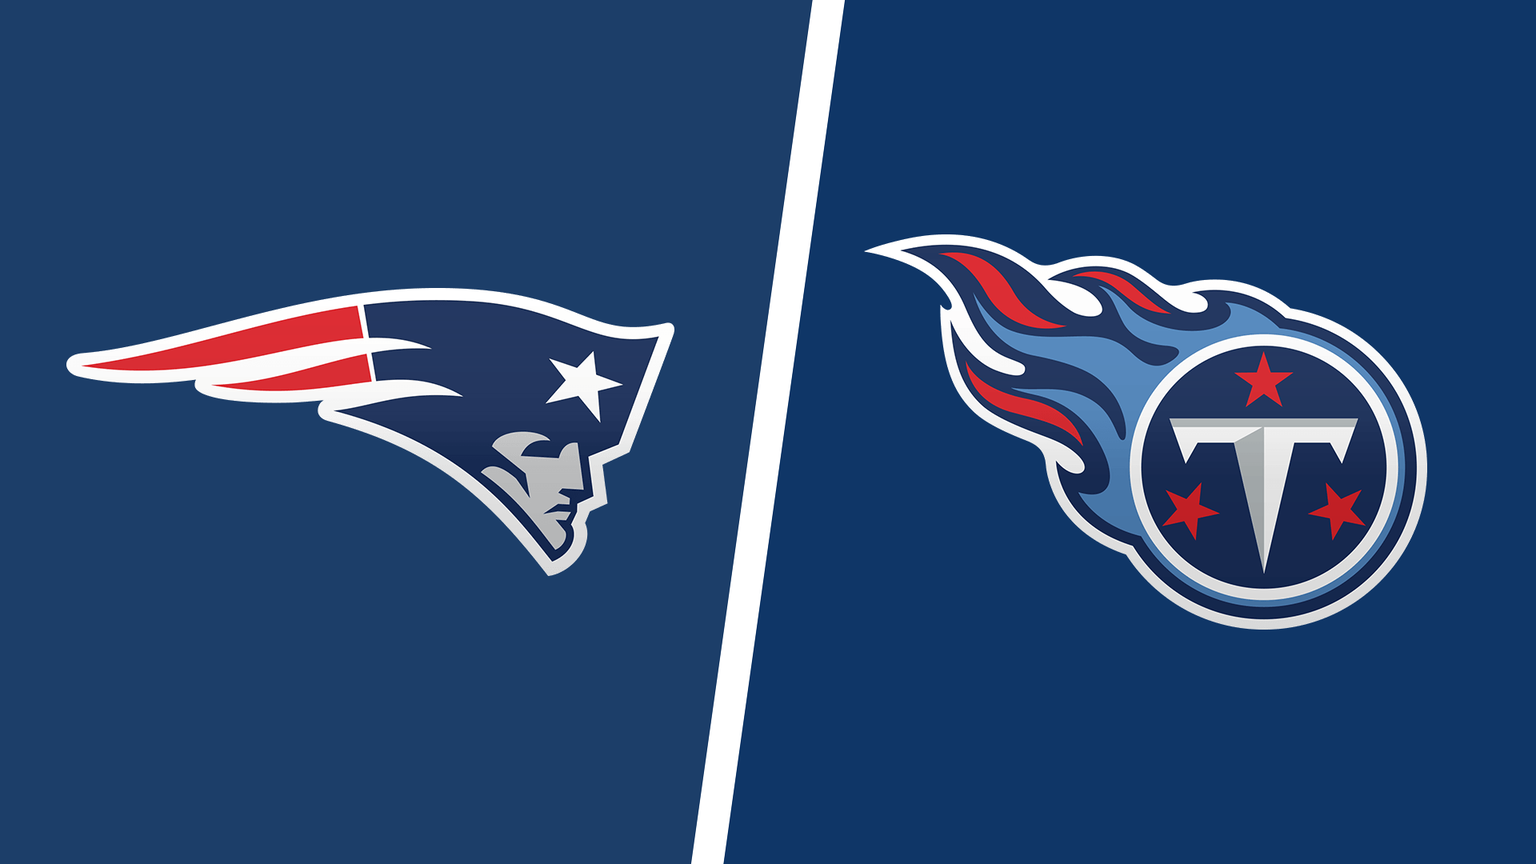 How to Watch Tennessee Titans vs. New England Patriots Week 12 NFL Game